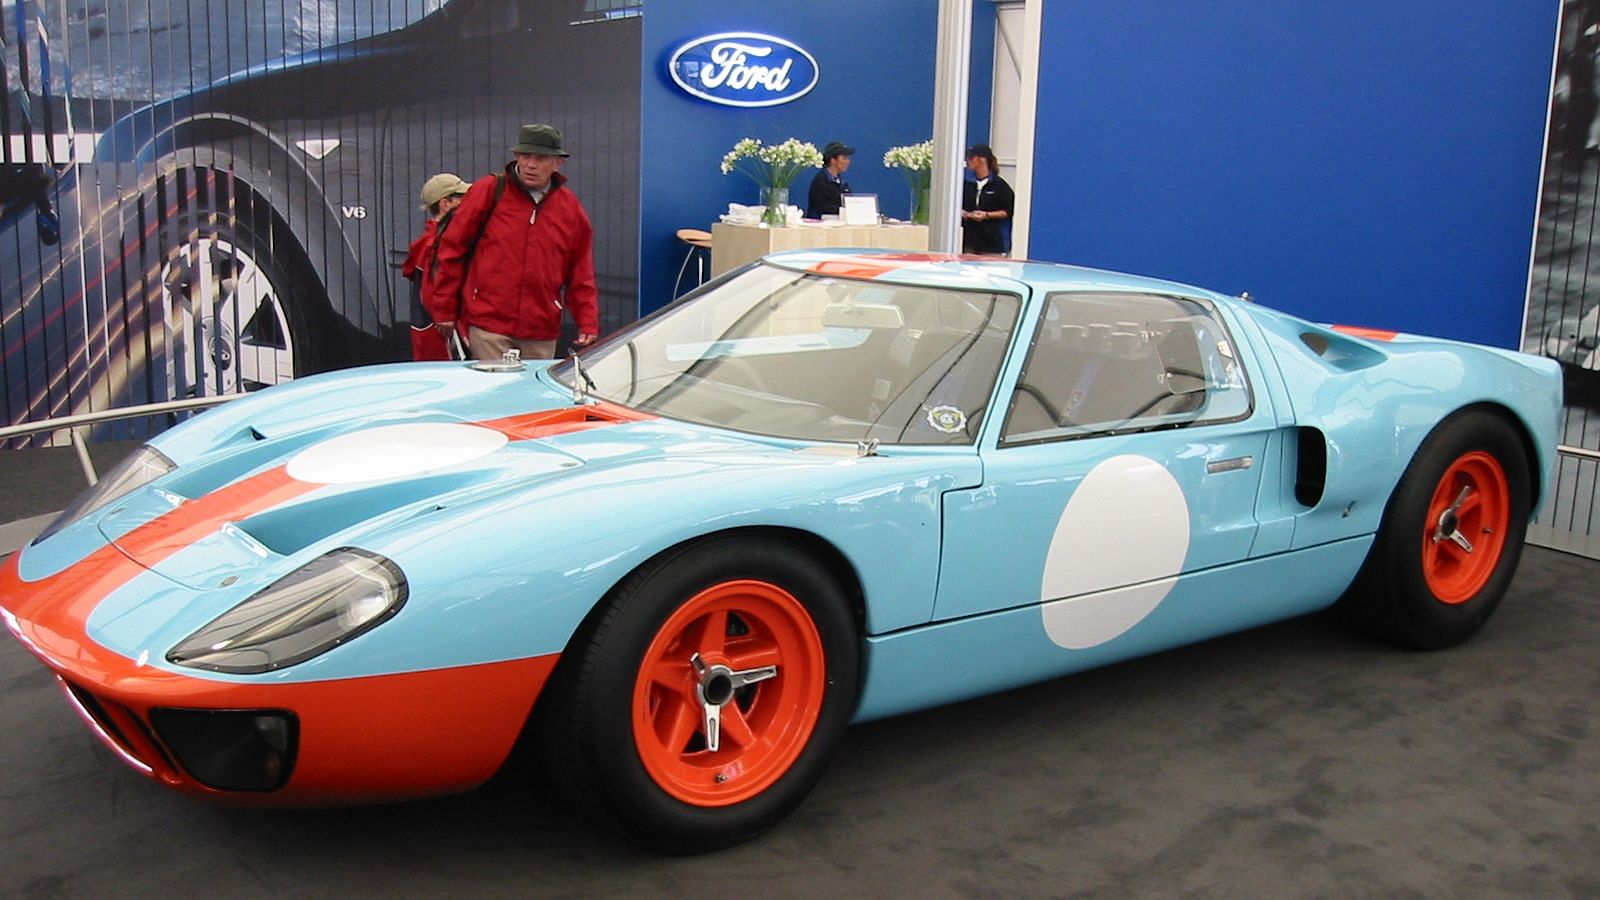 The Ford GT40 was one of the best performers for Ford at the Le Mans.